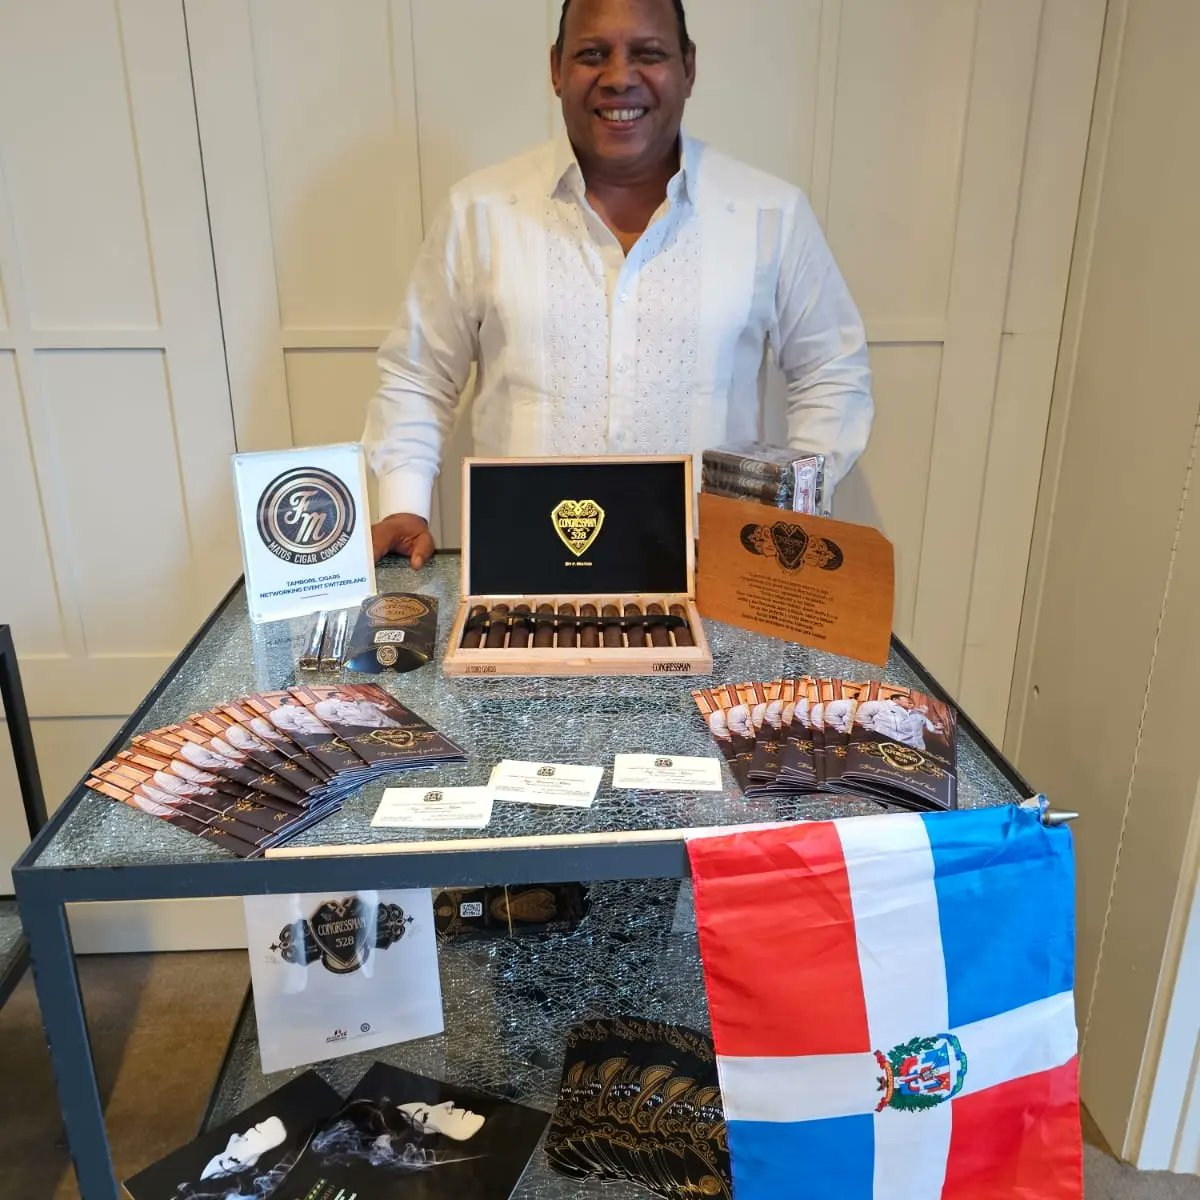 #CigarroDominicano at an exclusive event in Switzerland featuring high-quality rums and cigars. Celebrating the Dominican tobacco industry! Thanks to #ADOCITAB and @ProIndustriaRD for the invitation and to the Embassy of the Dominican Republic in Switzerland for the support. 🇩🇴